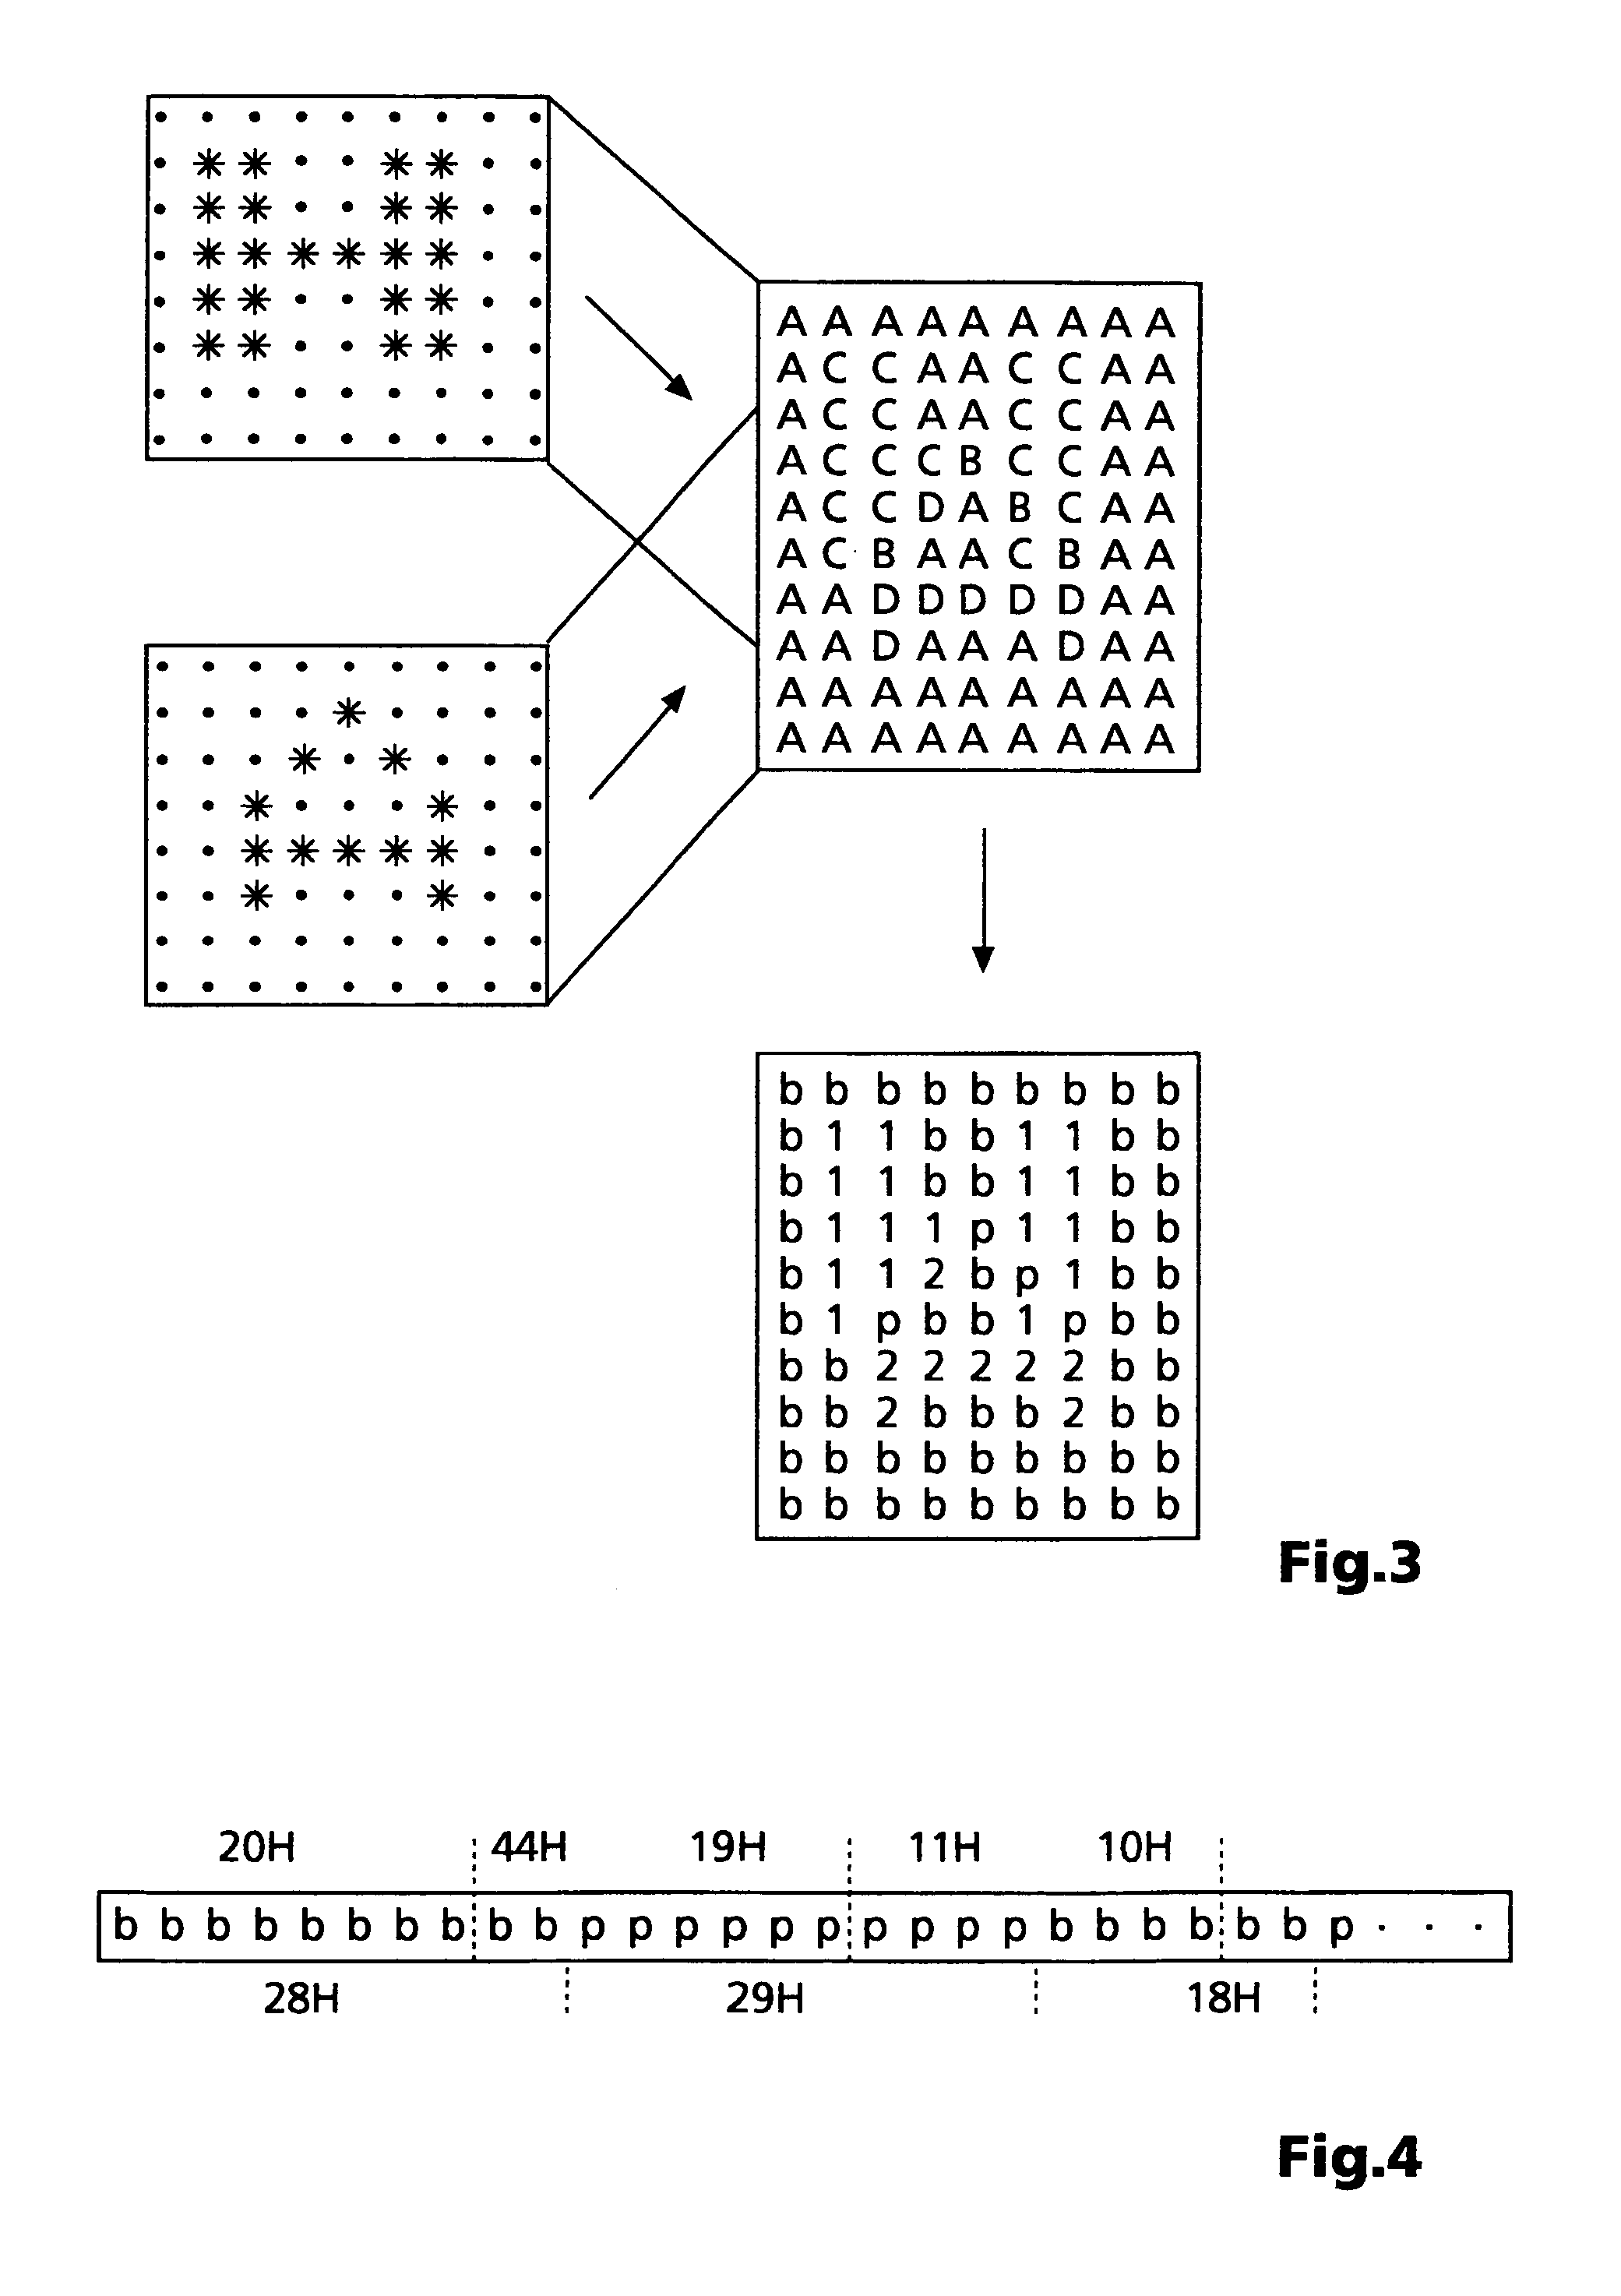 Coding method for picture sequence or sub-picture unit